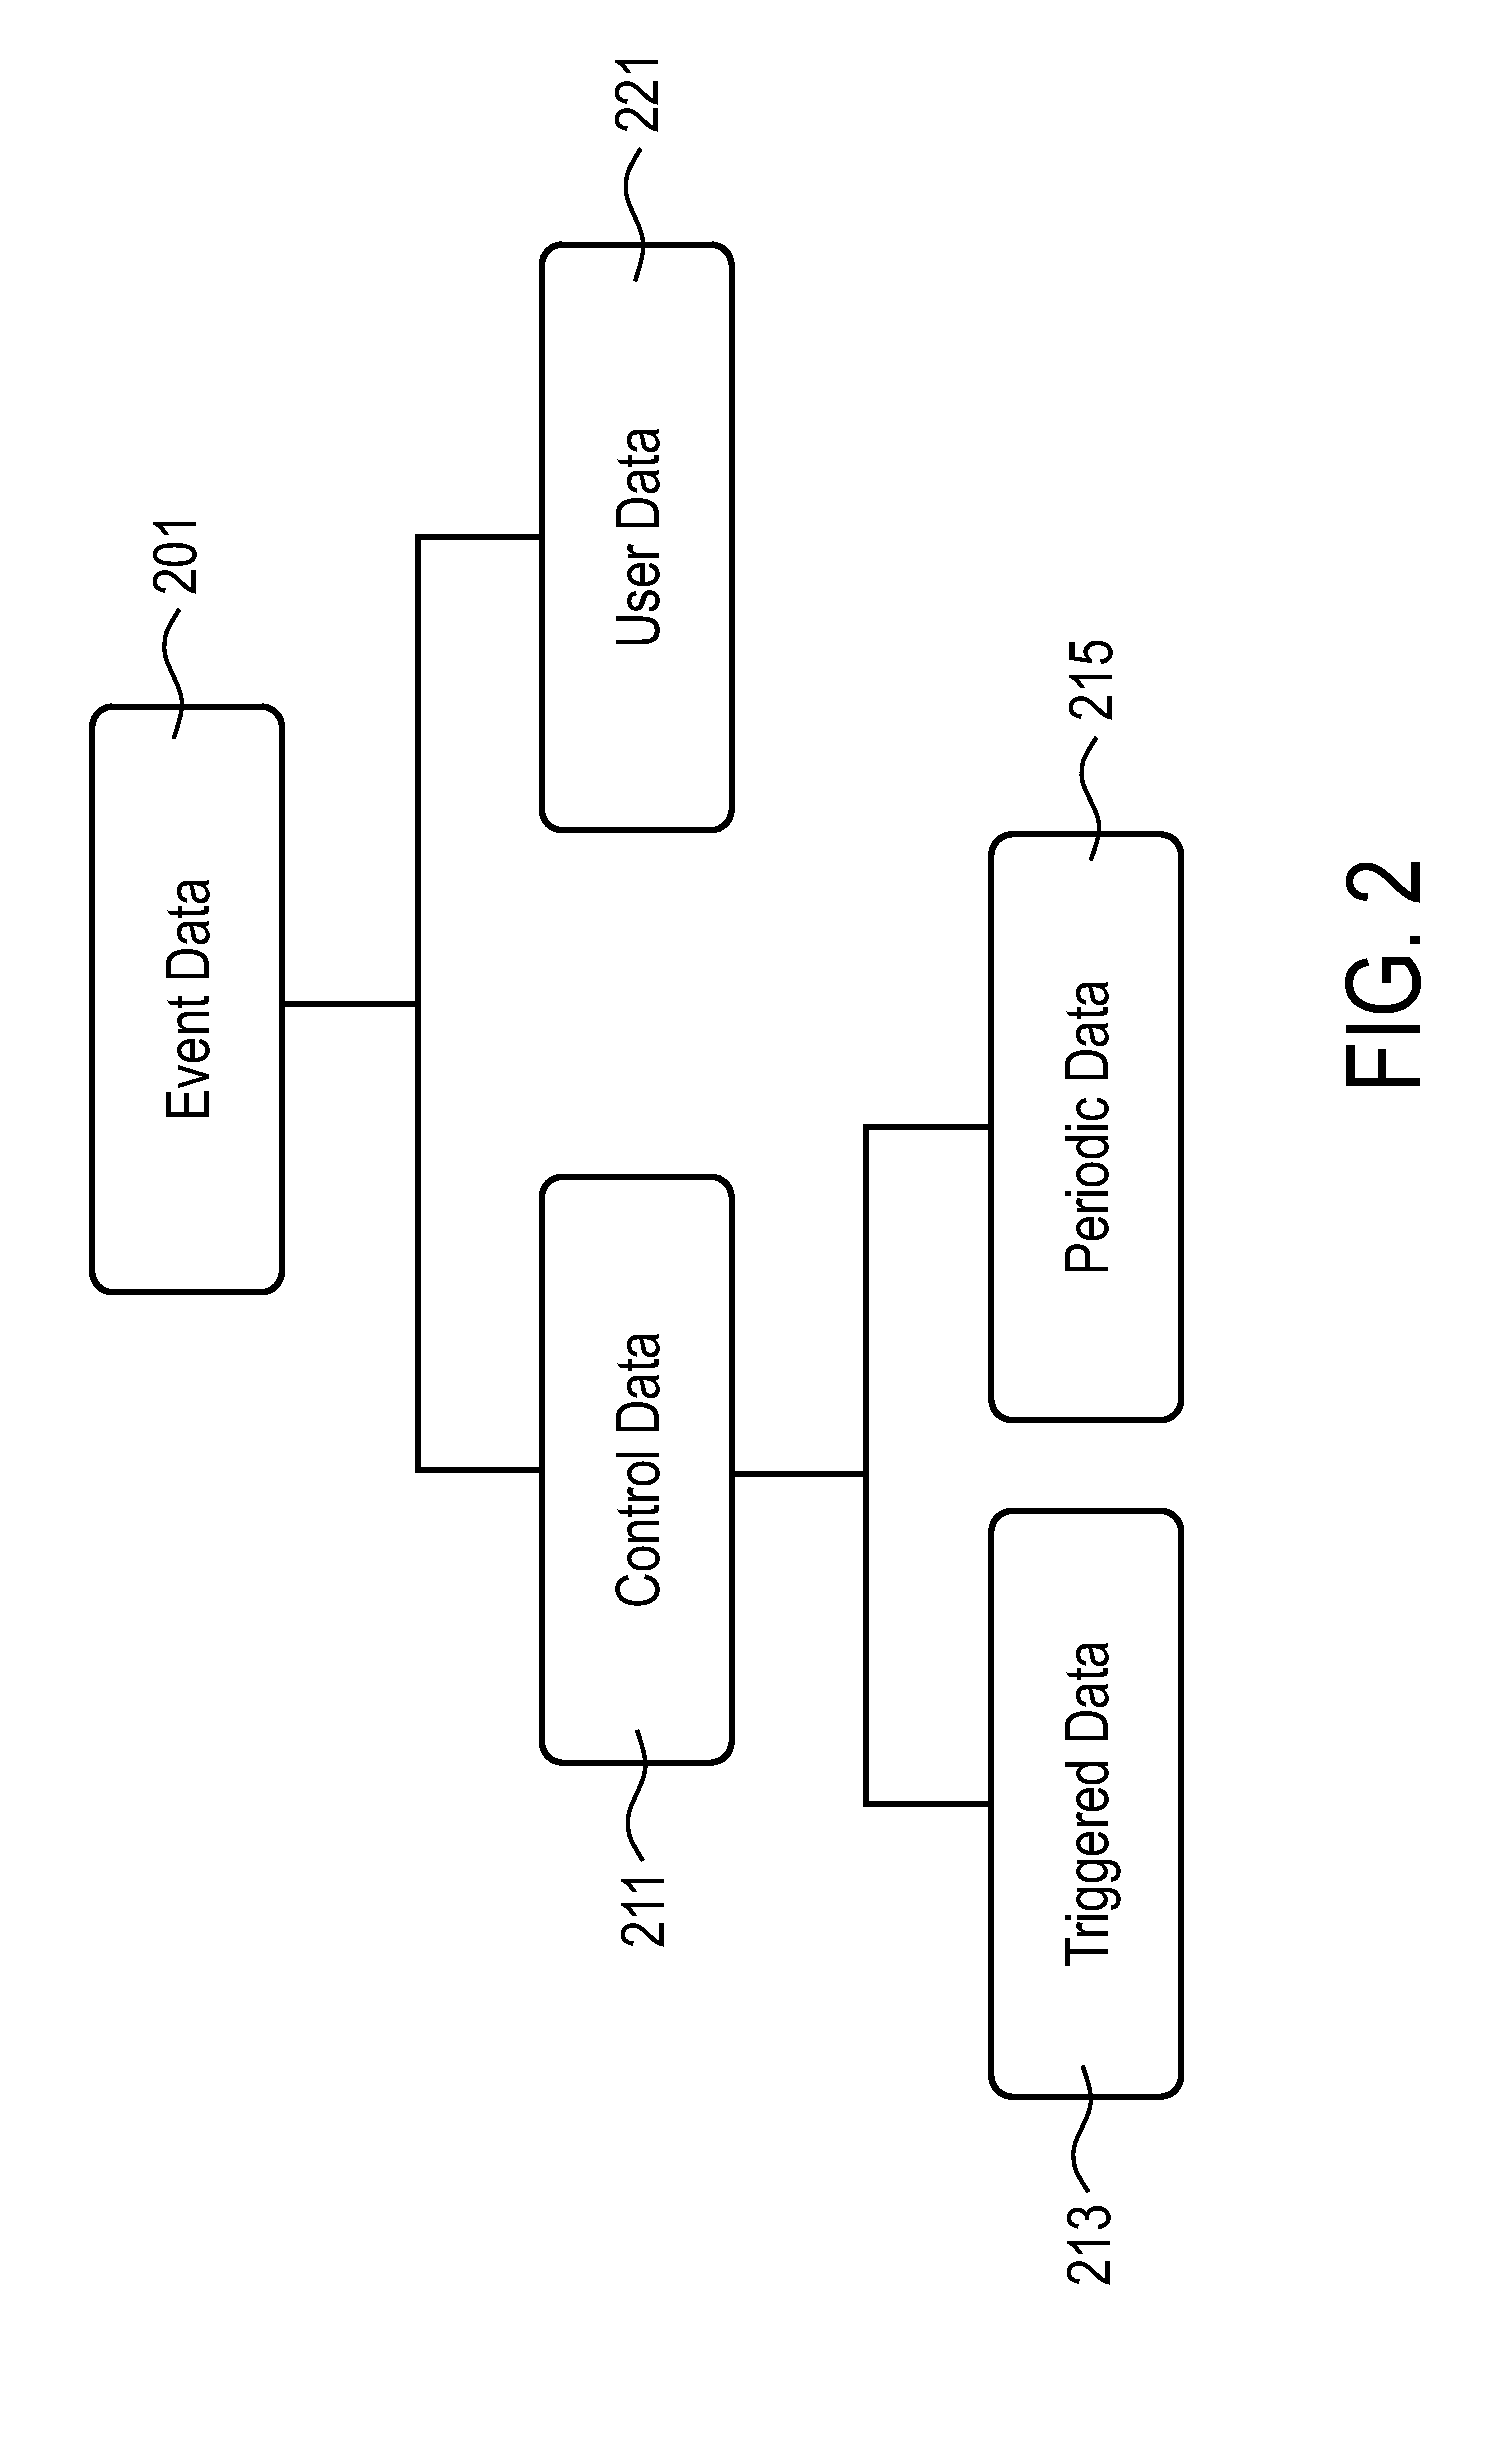 System and method for population tracking, counting, and movement estimation using mobile operational data and/or geographic information in mobile network